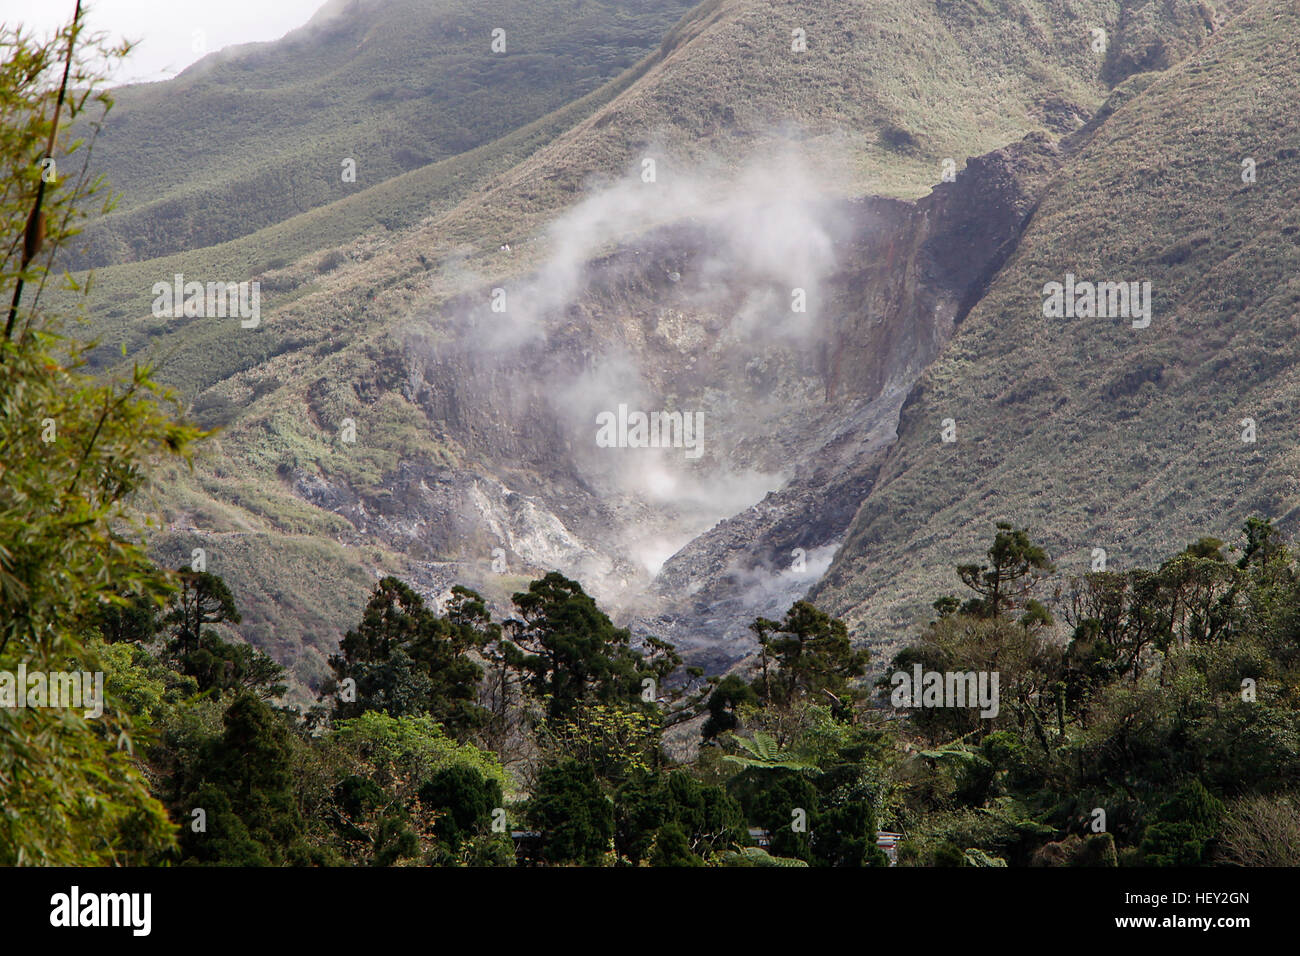 Sulfur crater. Stock Photo